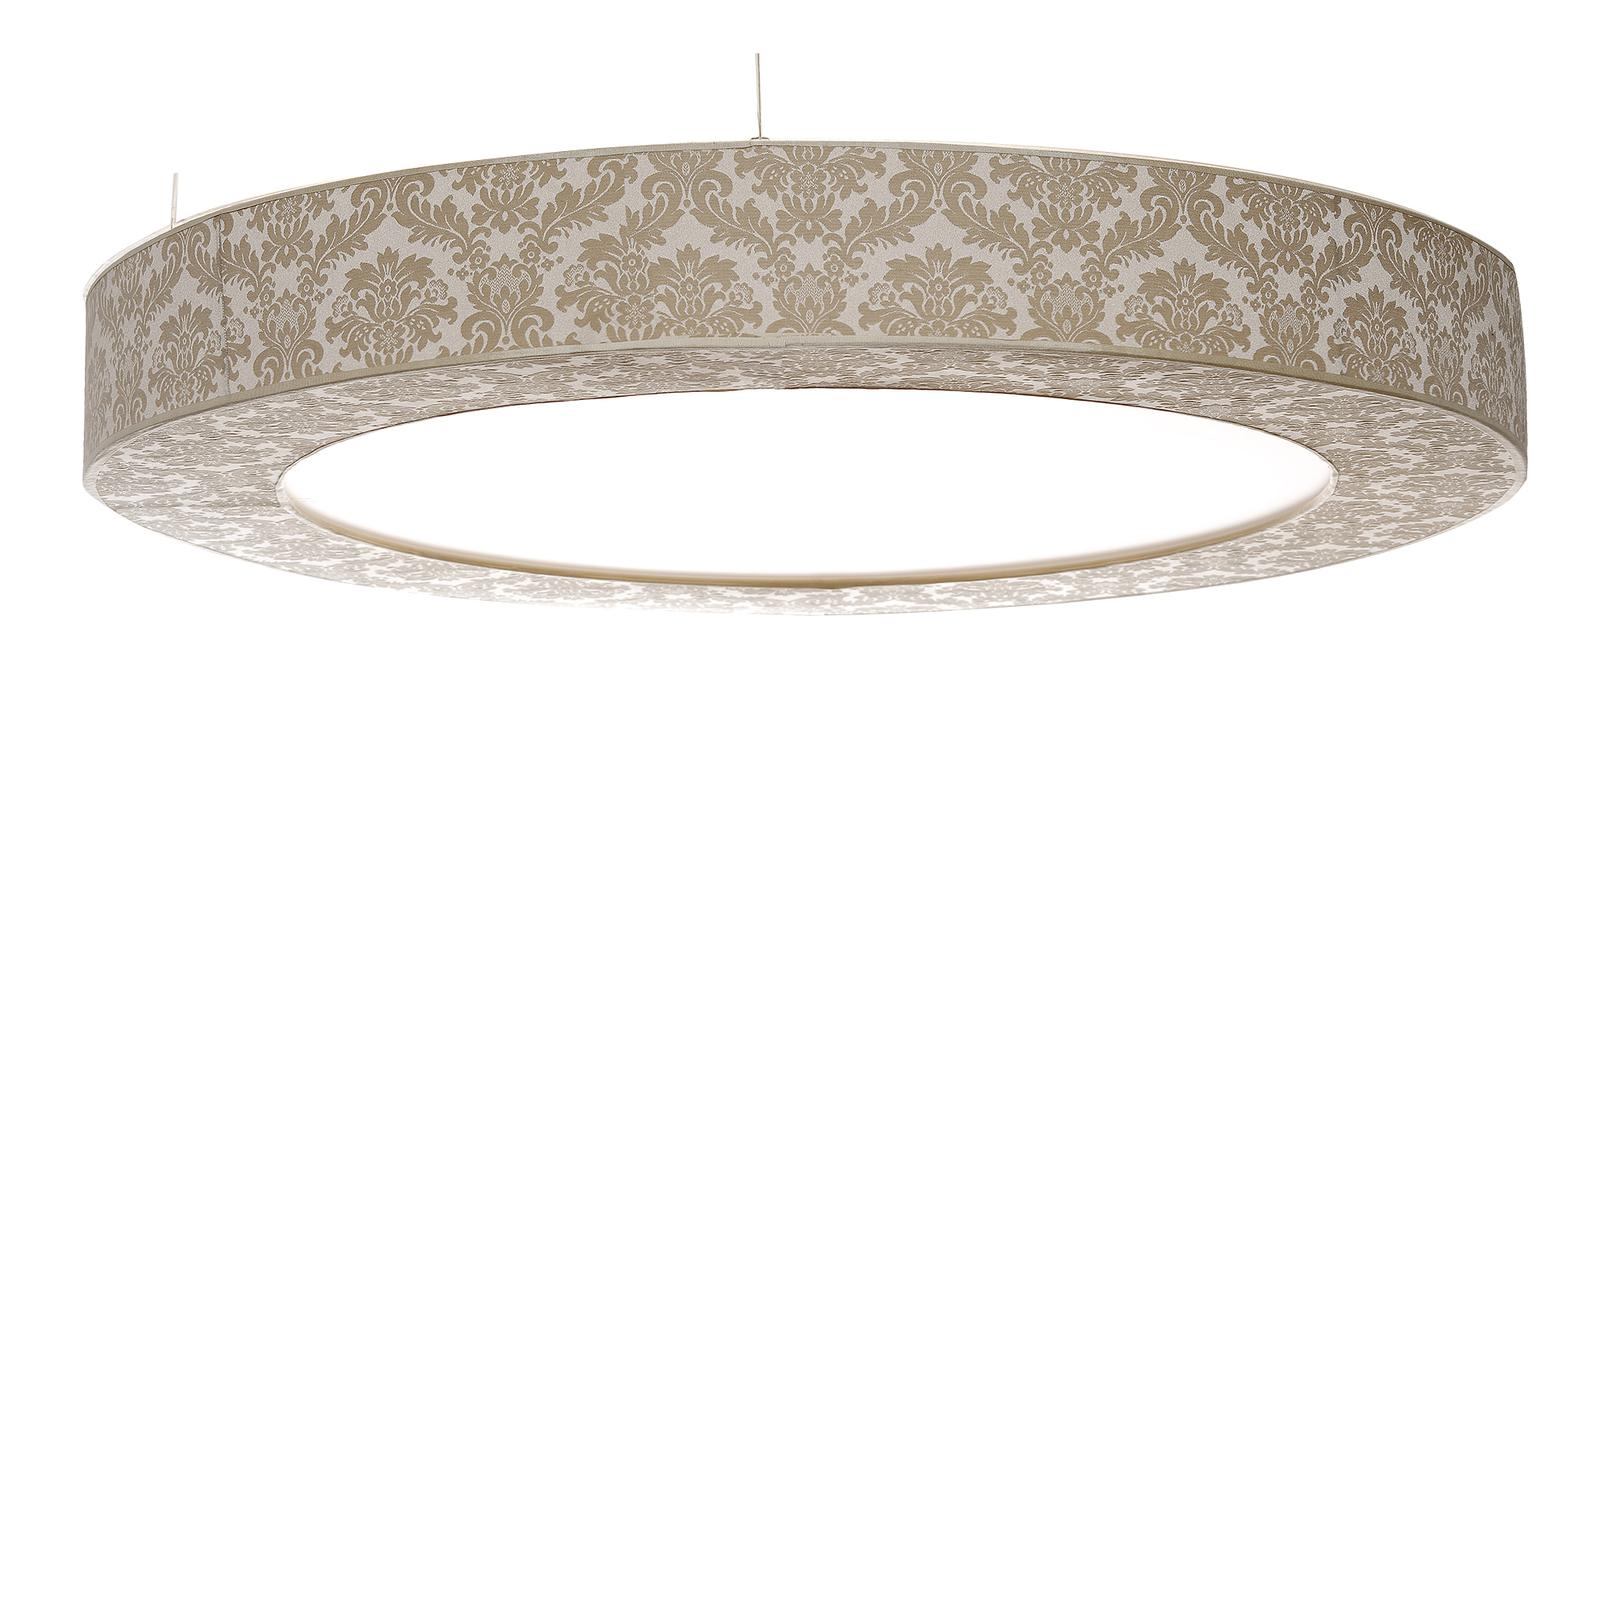 A celebration of earth satellite, this chandelier is in a perfect round shape whose rigorous geometry is given a traditional twist thanks to the damask print on the fabric upholstery in versatile neutral tones. The structure is in metal and supports